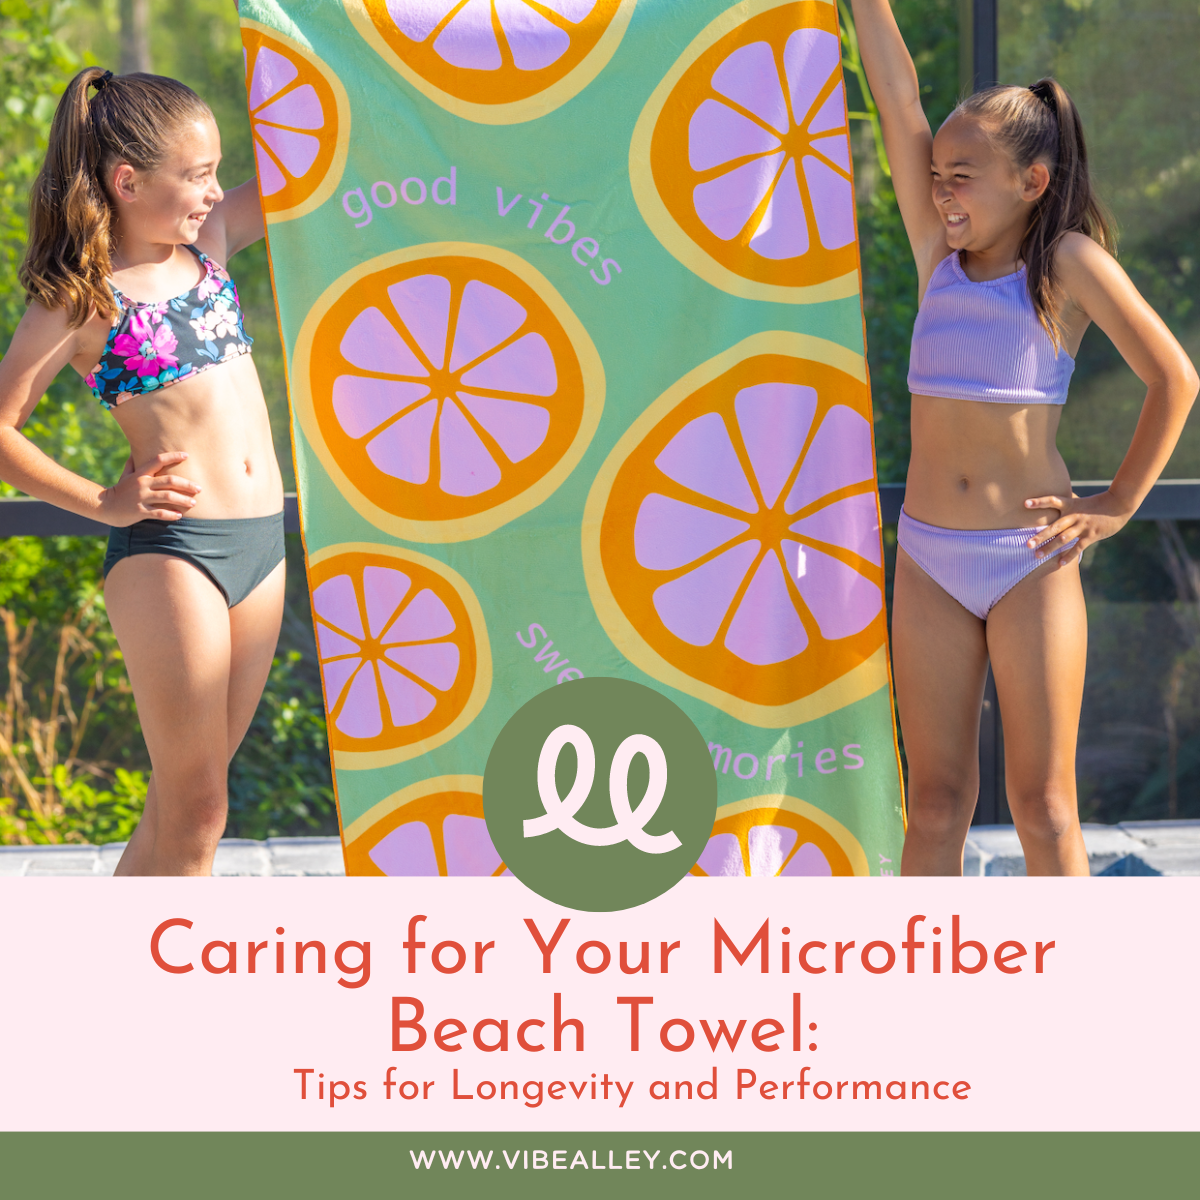 Caring for Your Microfiber Beach Towel: Tips for Longevity and Performance